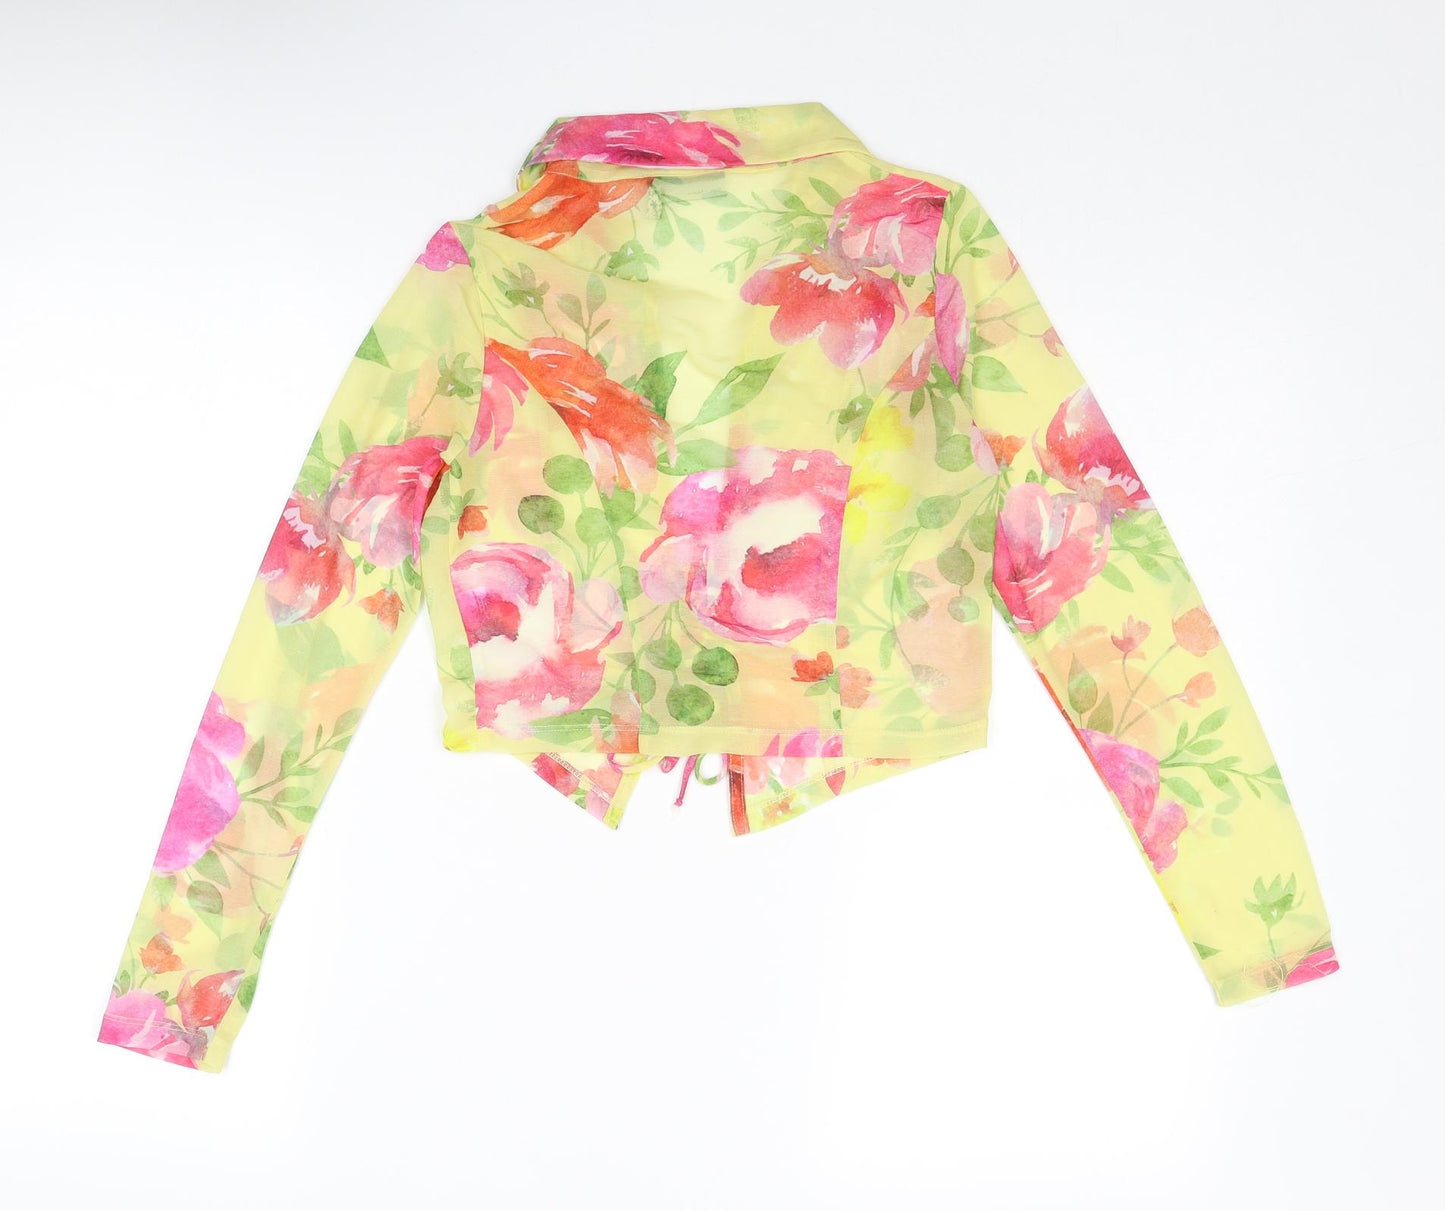 ASOS Womens Multicoloured Floral Polyester Basic Blouse Size 8 Collared